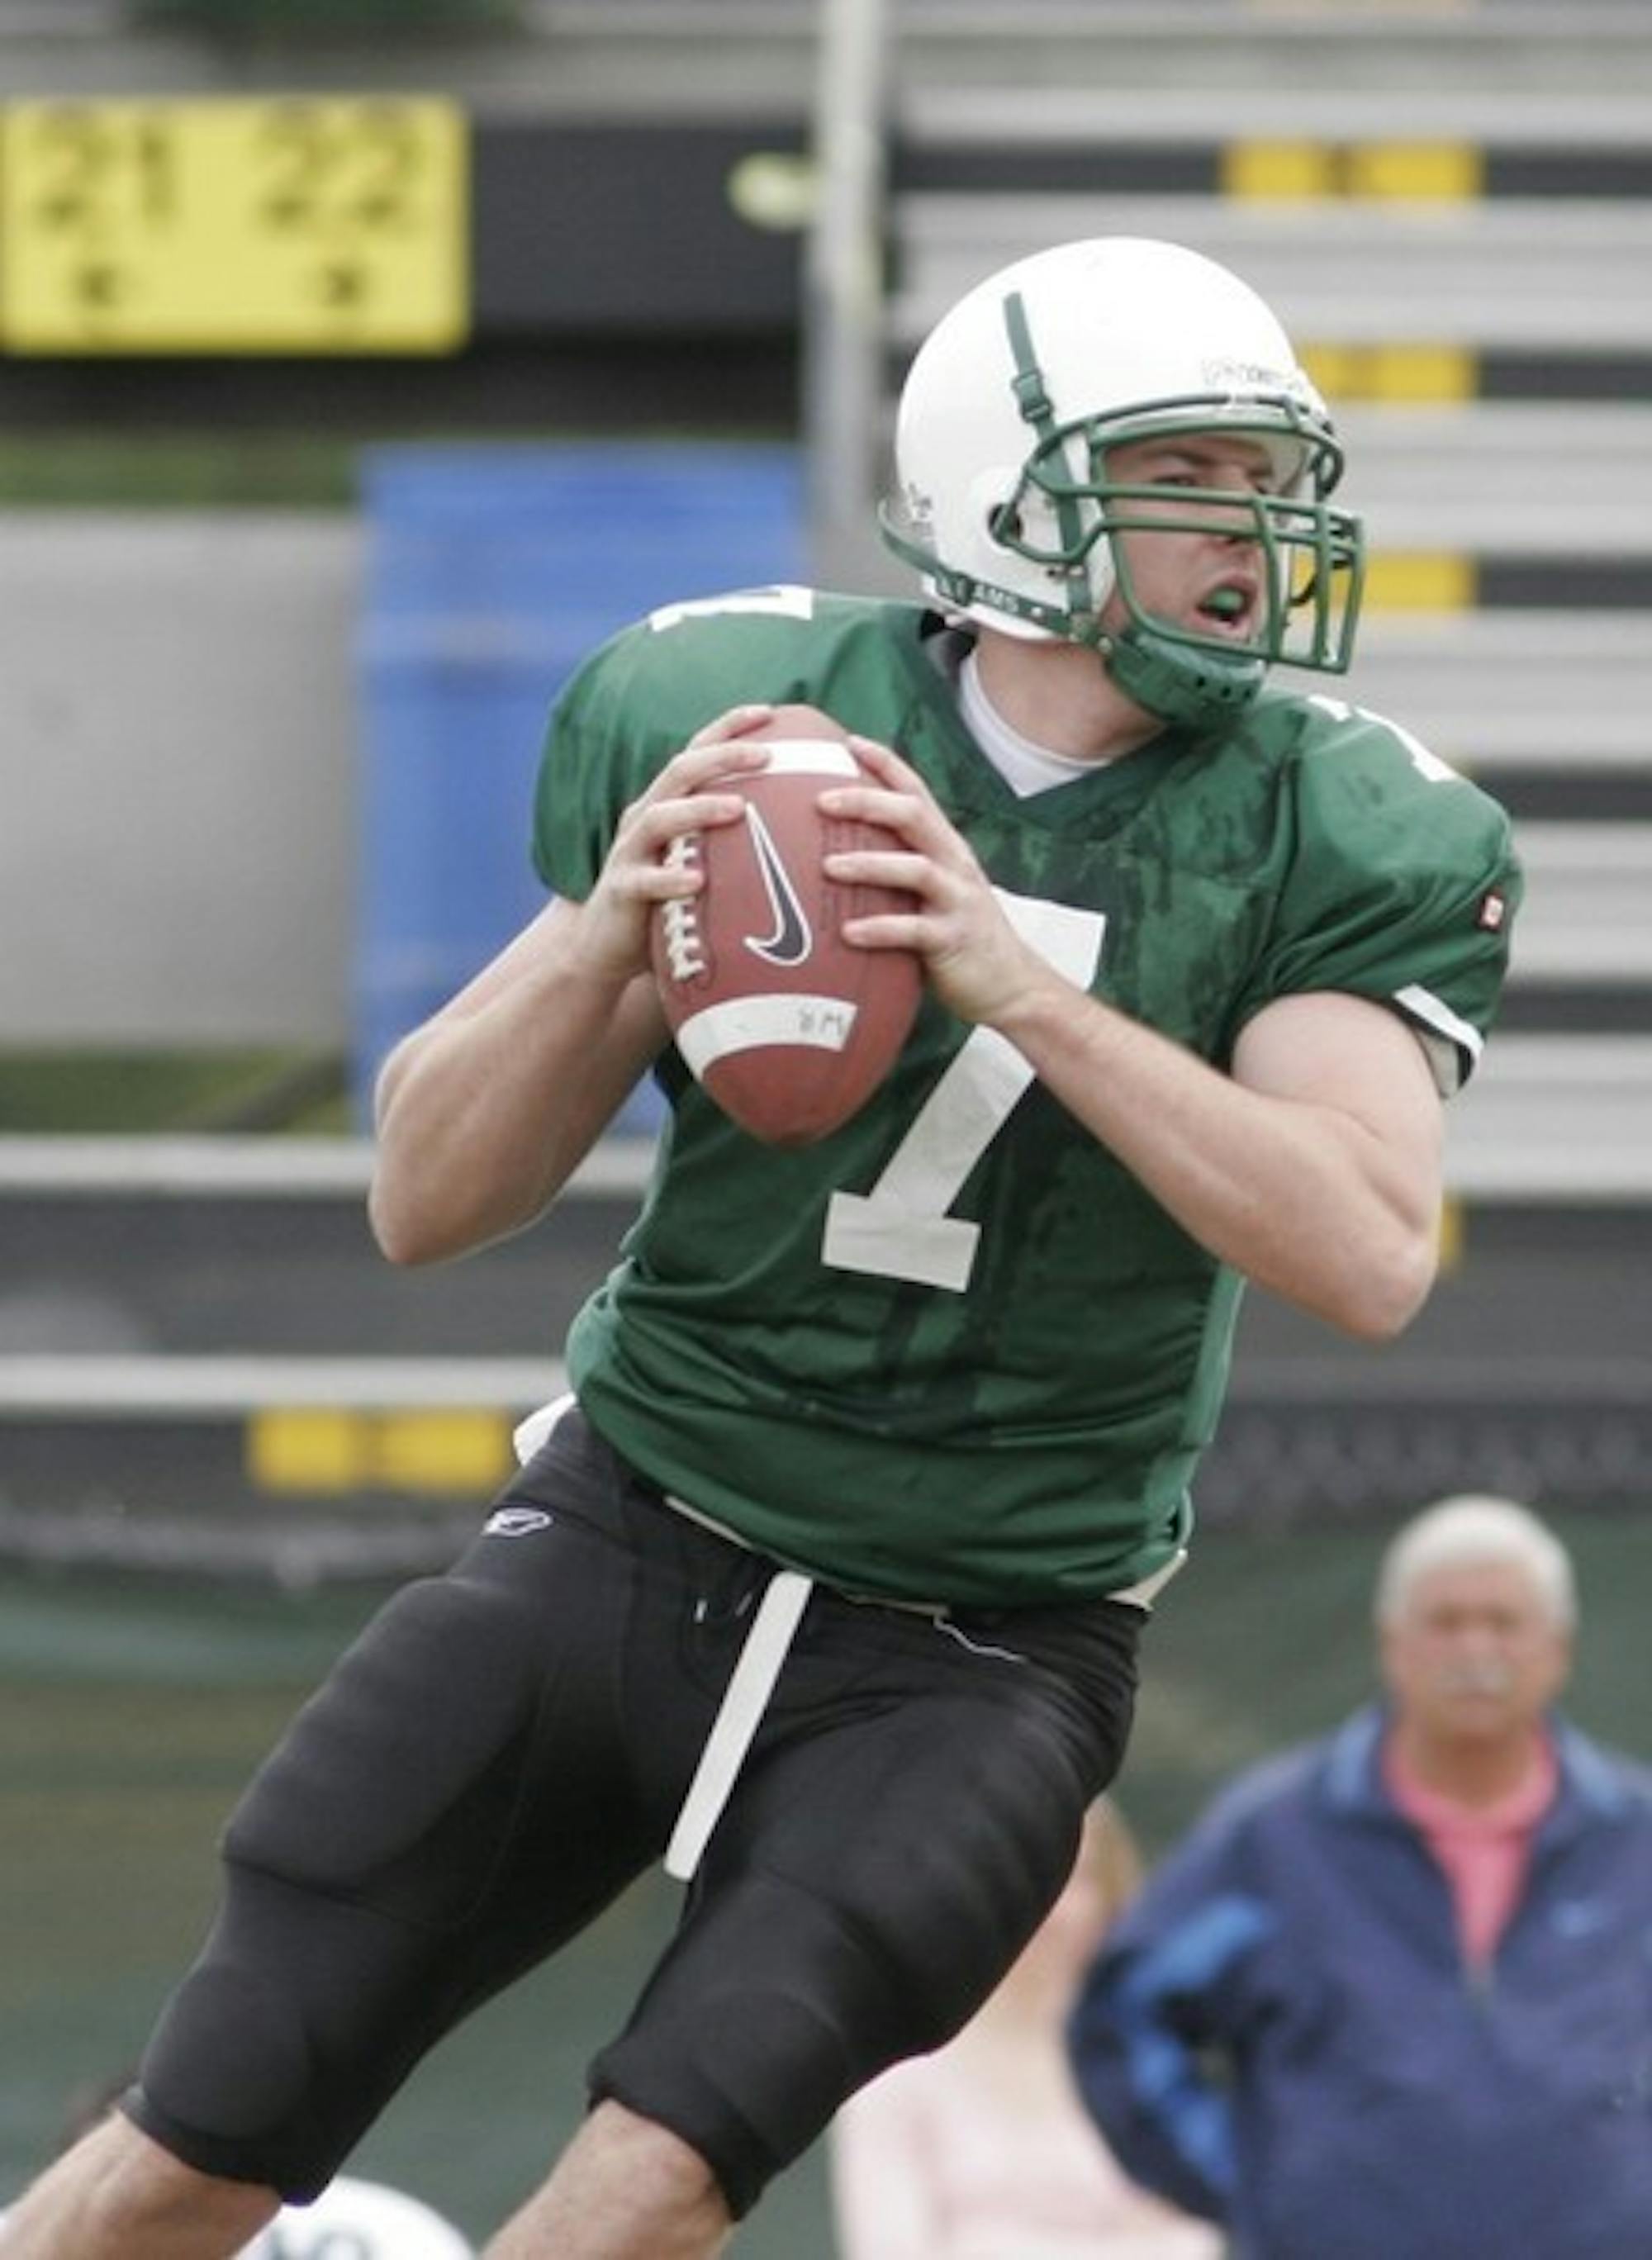 Tom Bennewitz '08 completed 14 of 22 passes for 102 yards in Dartmouth's 28-7 defeat at the hands of the Colgate Red Raiders on Saturday.